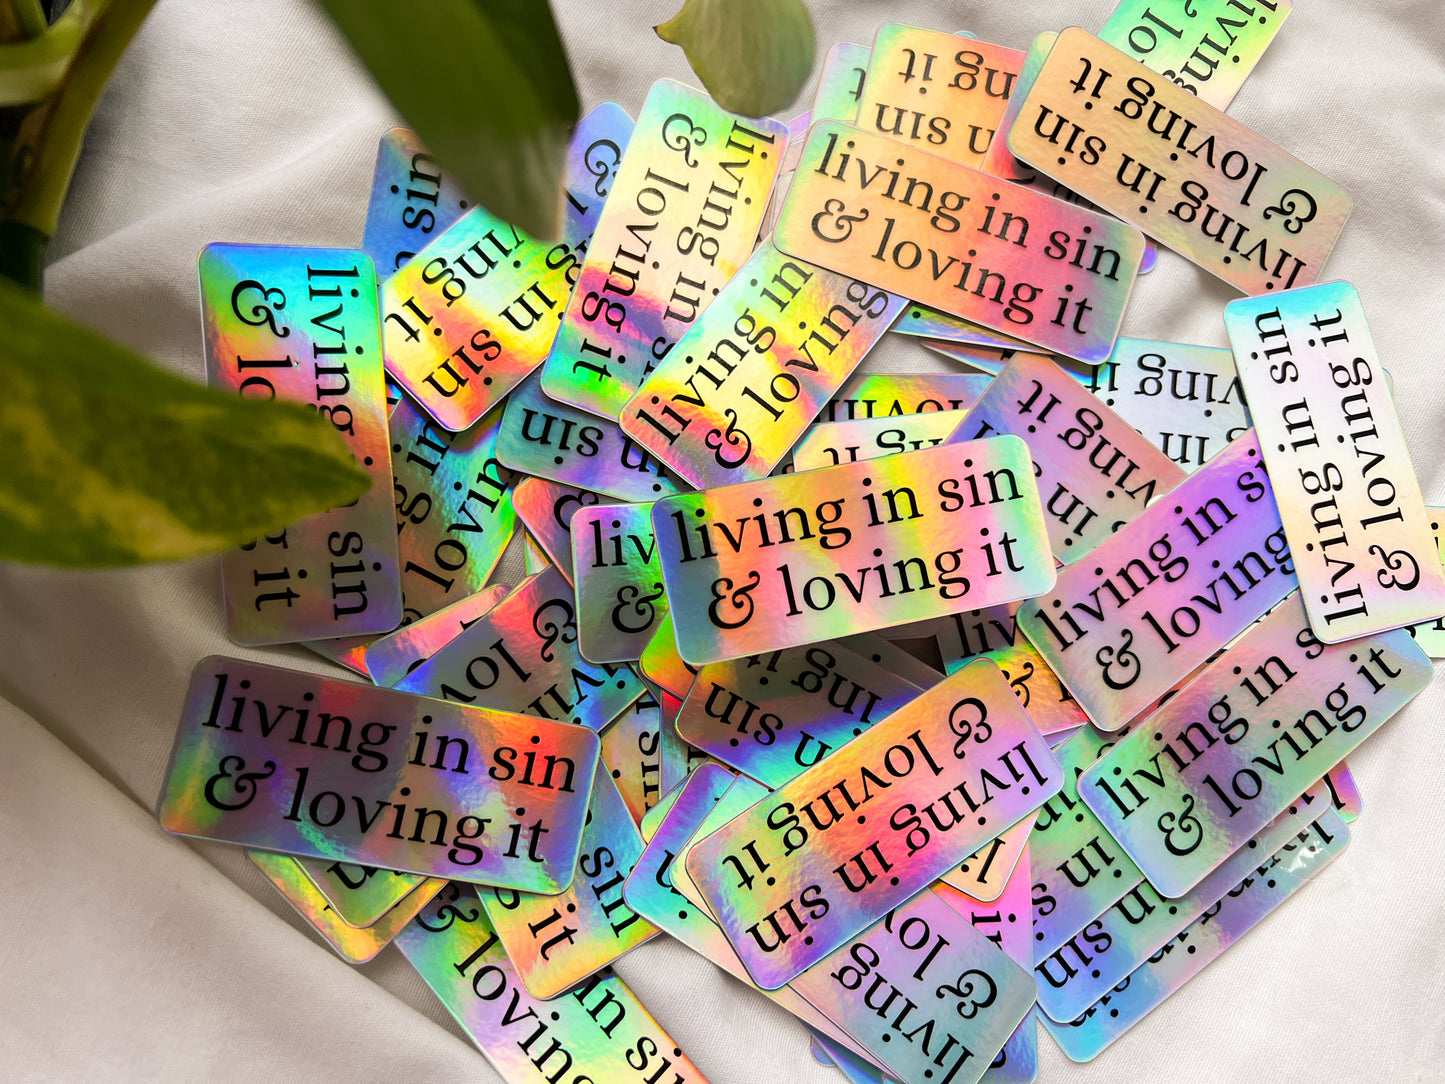 living in sin & loving it holographic sticker